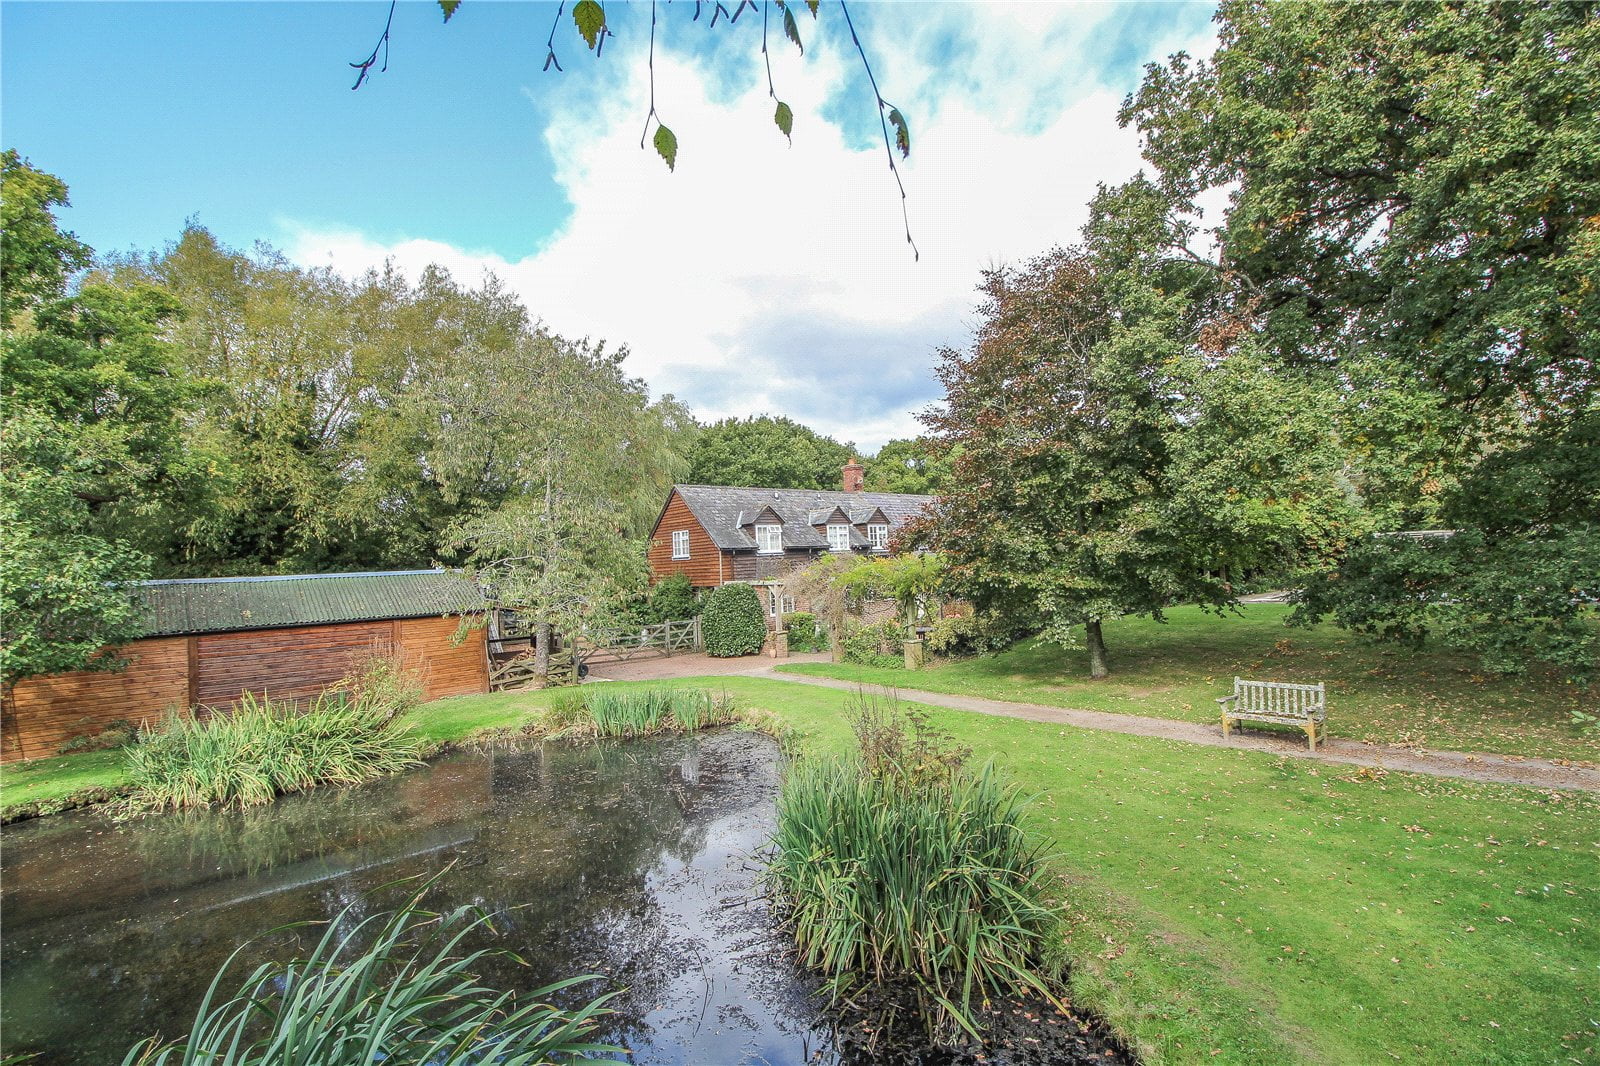 New Barn Lane, Henfield, West Sussex,  | residential-sales